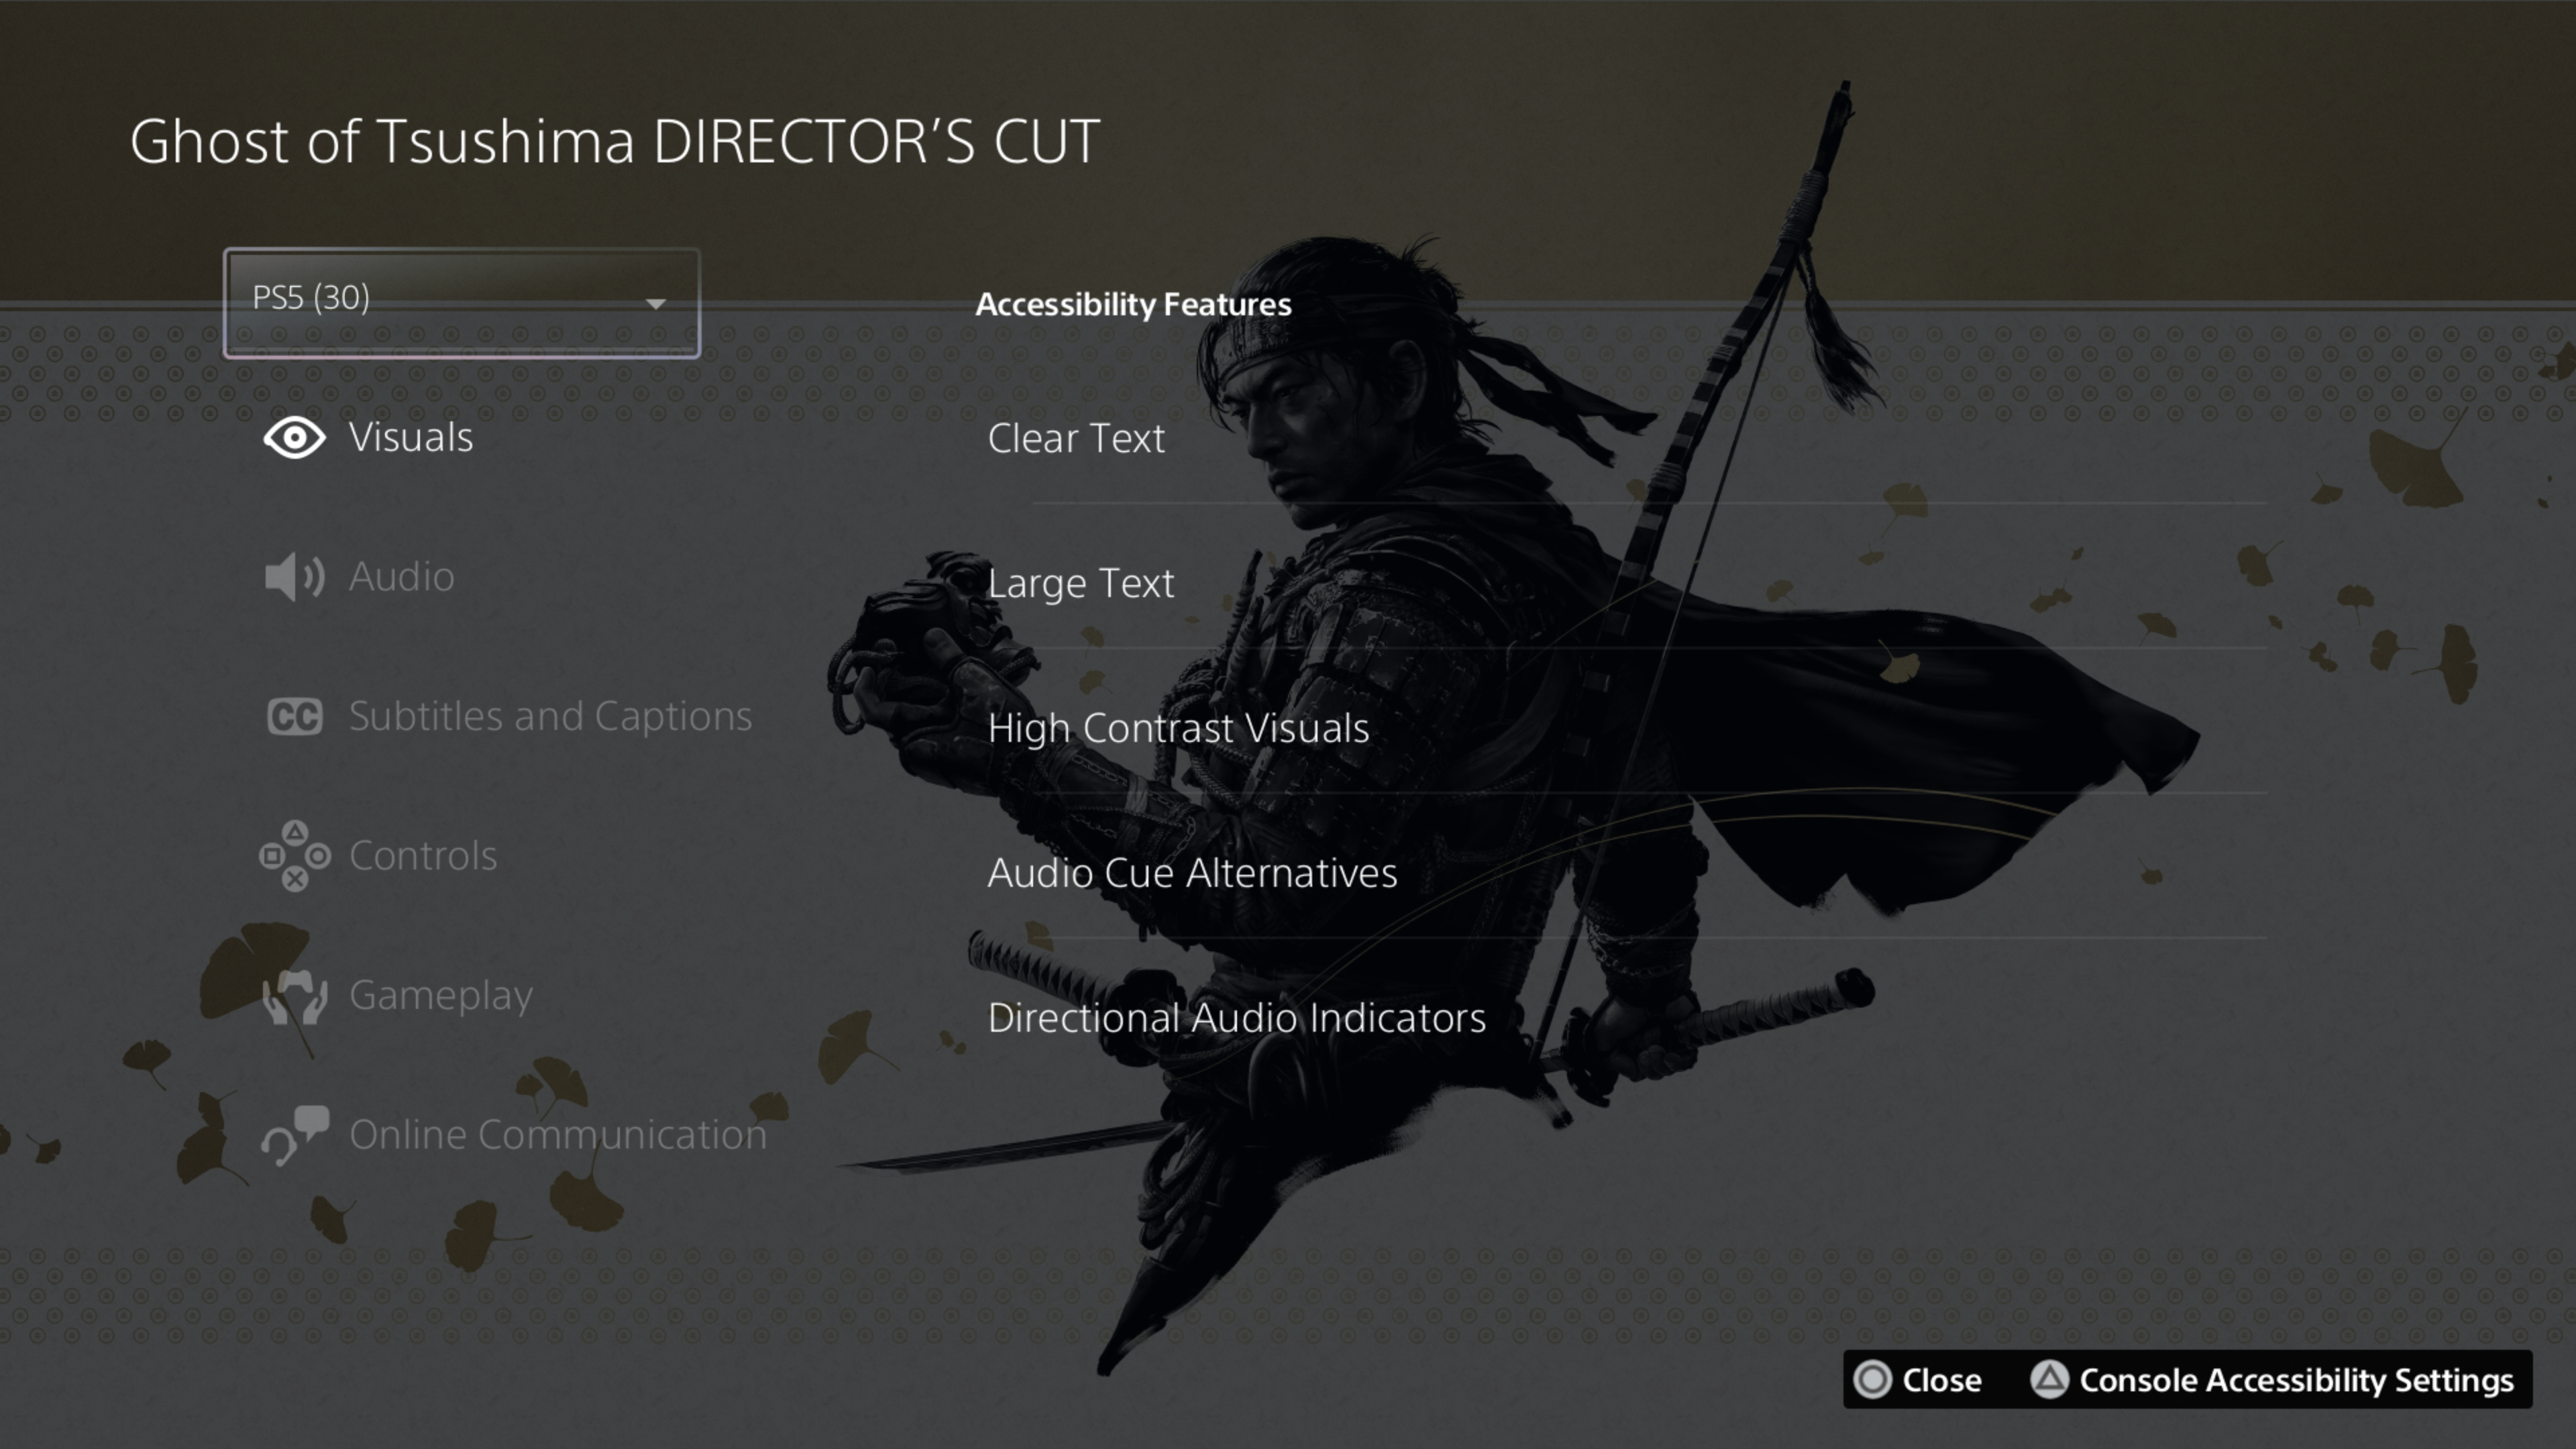 Accessibility features for Ghost of Tsushima Director's cut